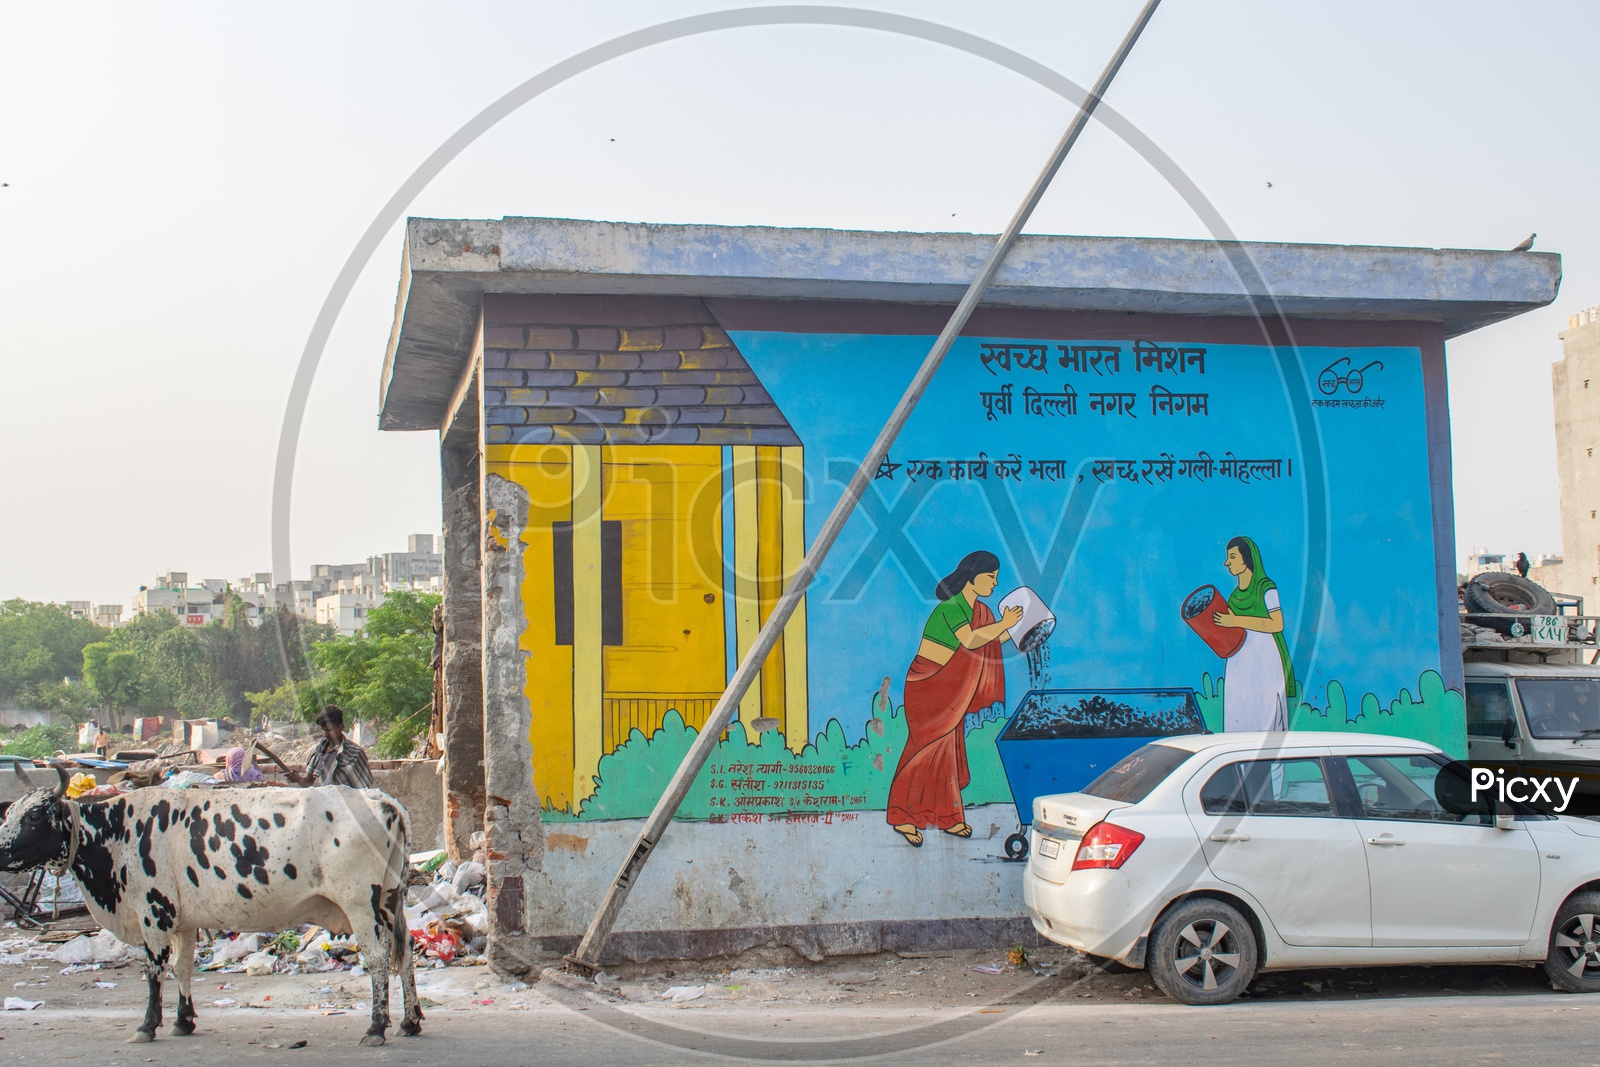 Dumping site for garbage and "Swachh Bharat mission" advertisement at the wall